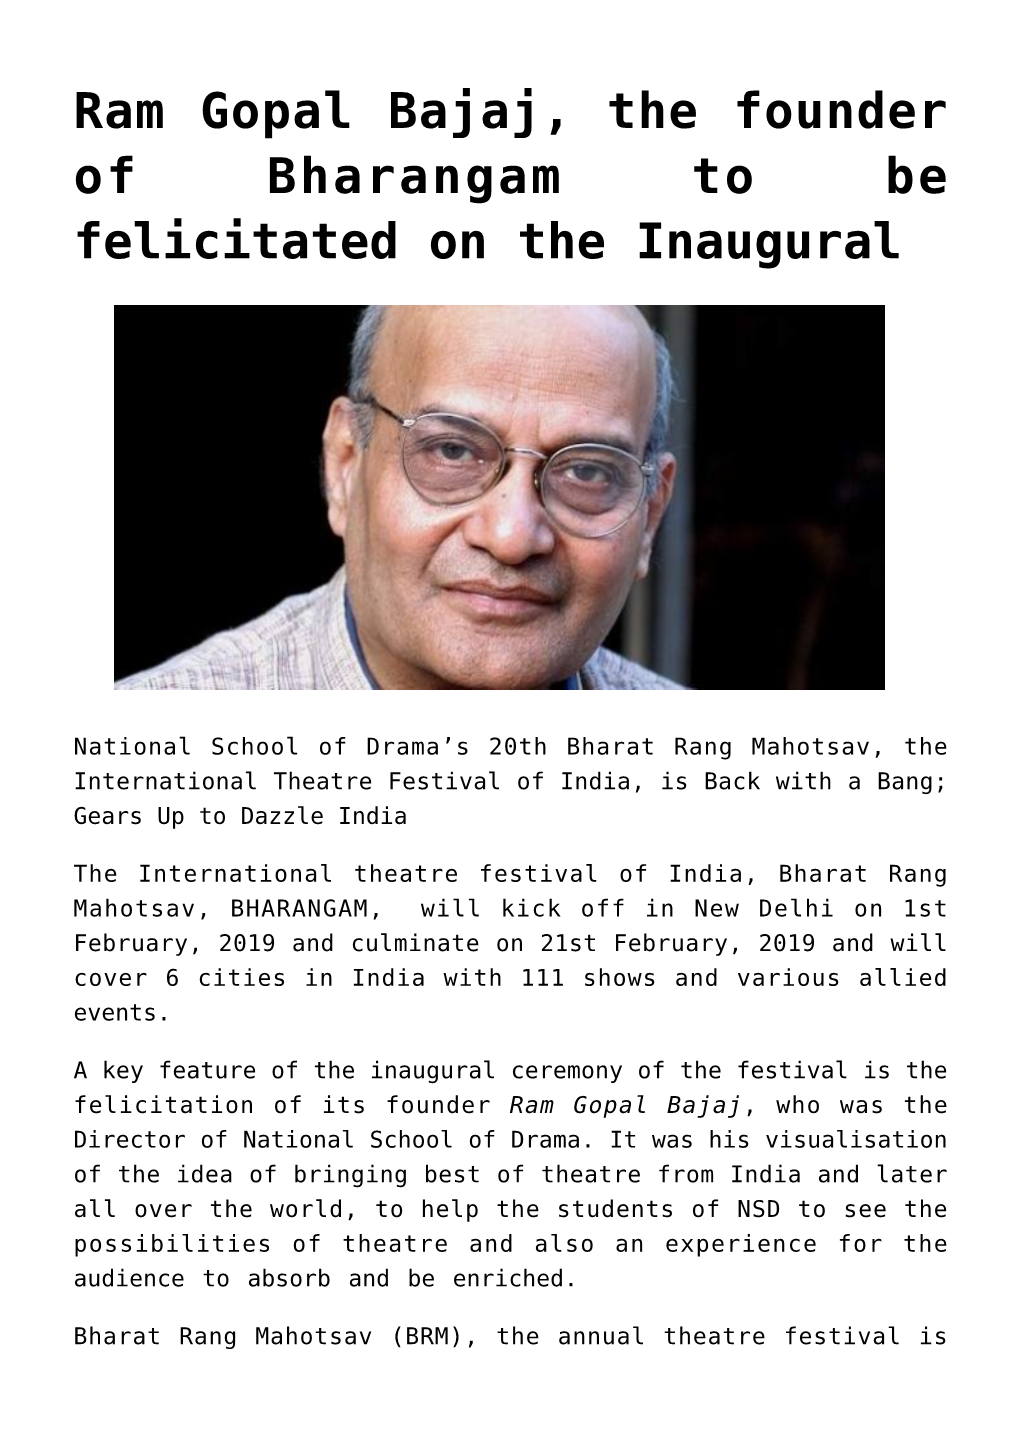 Ram Gopal Bajaj, the Founder of Bharangam to Be Felicitated on the Inaugural